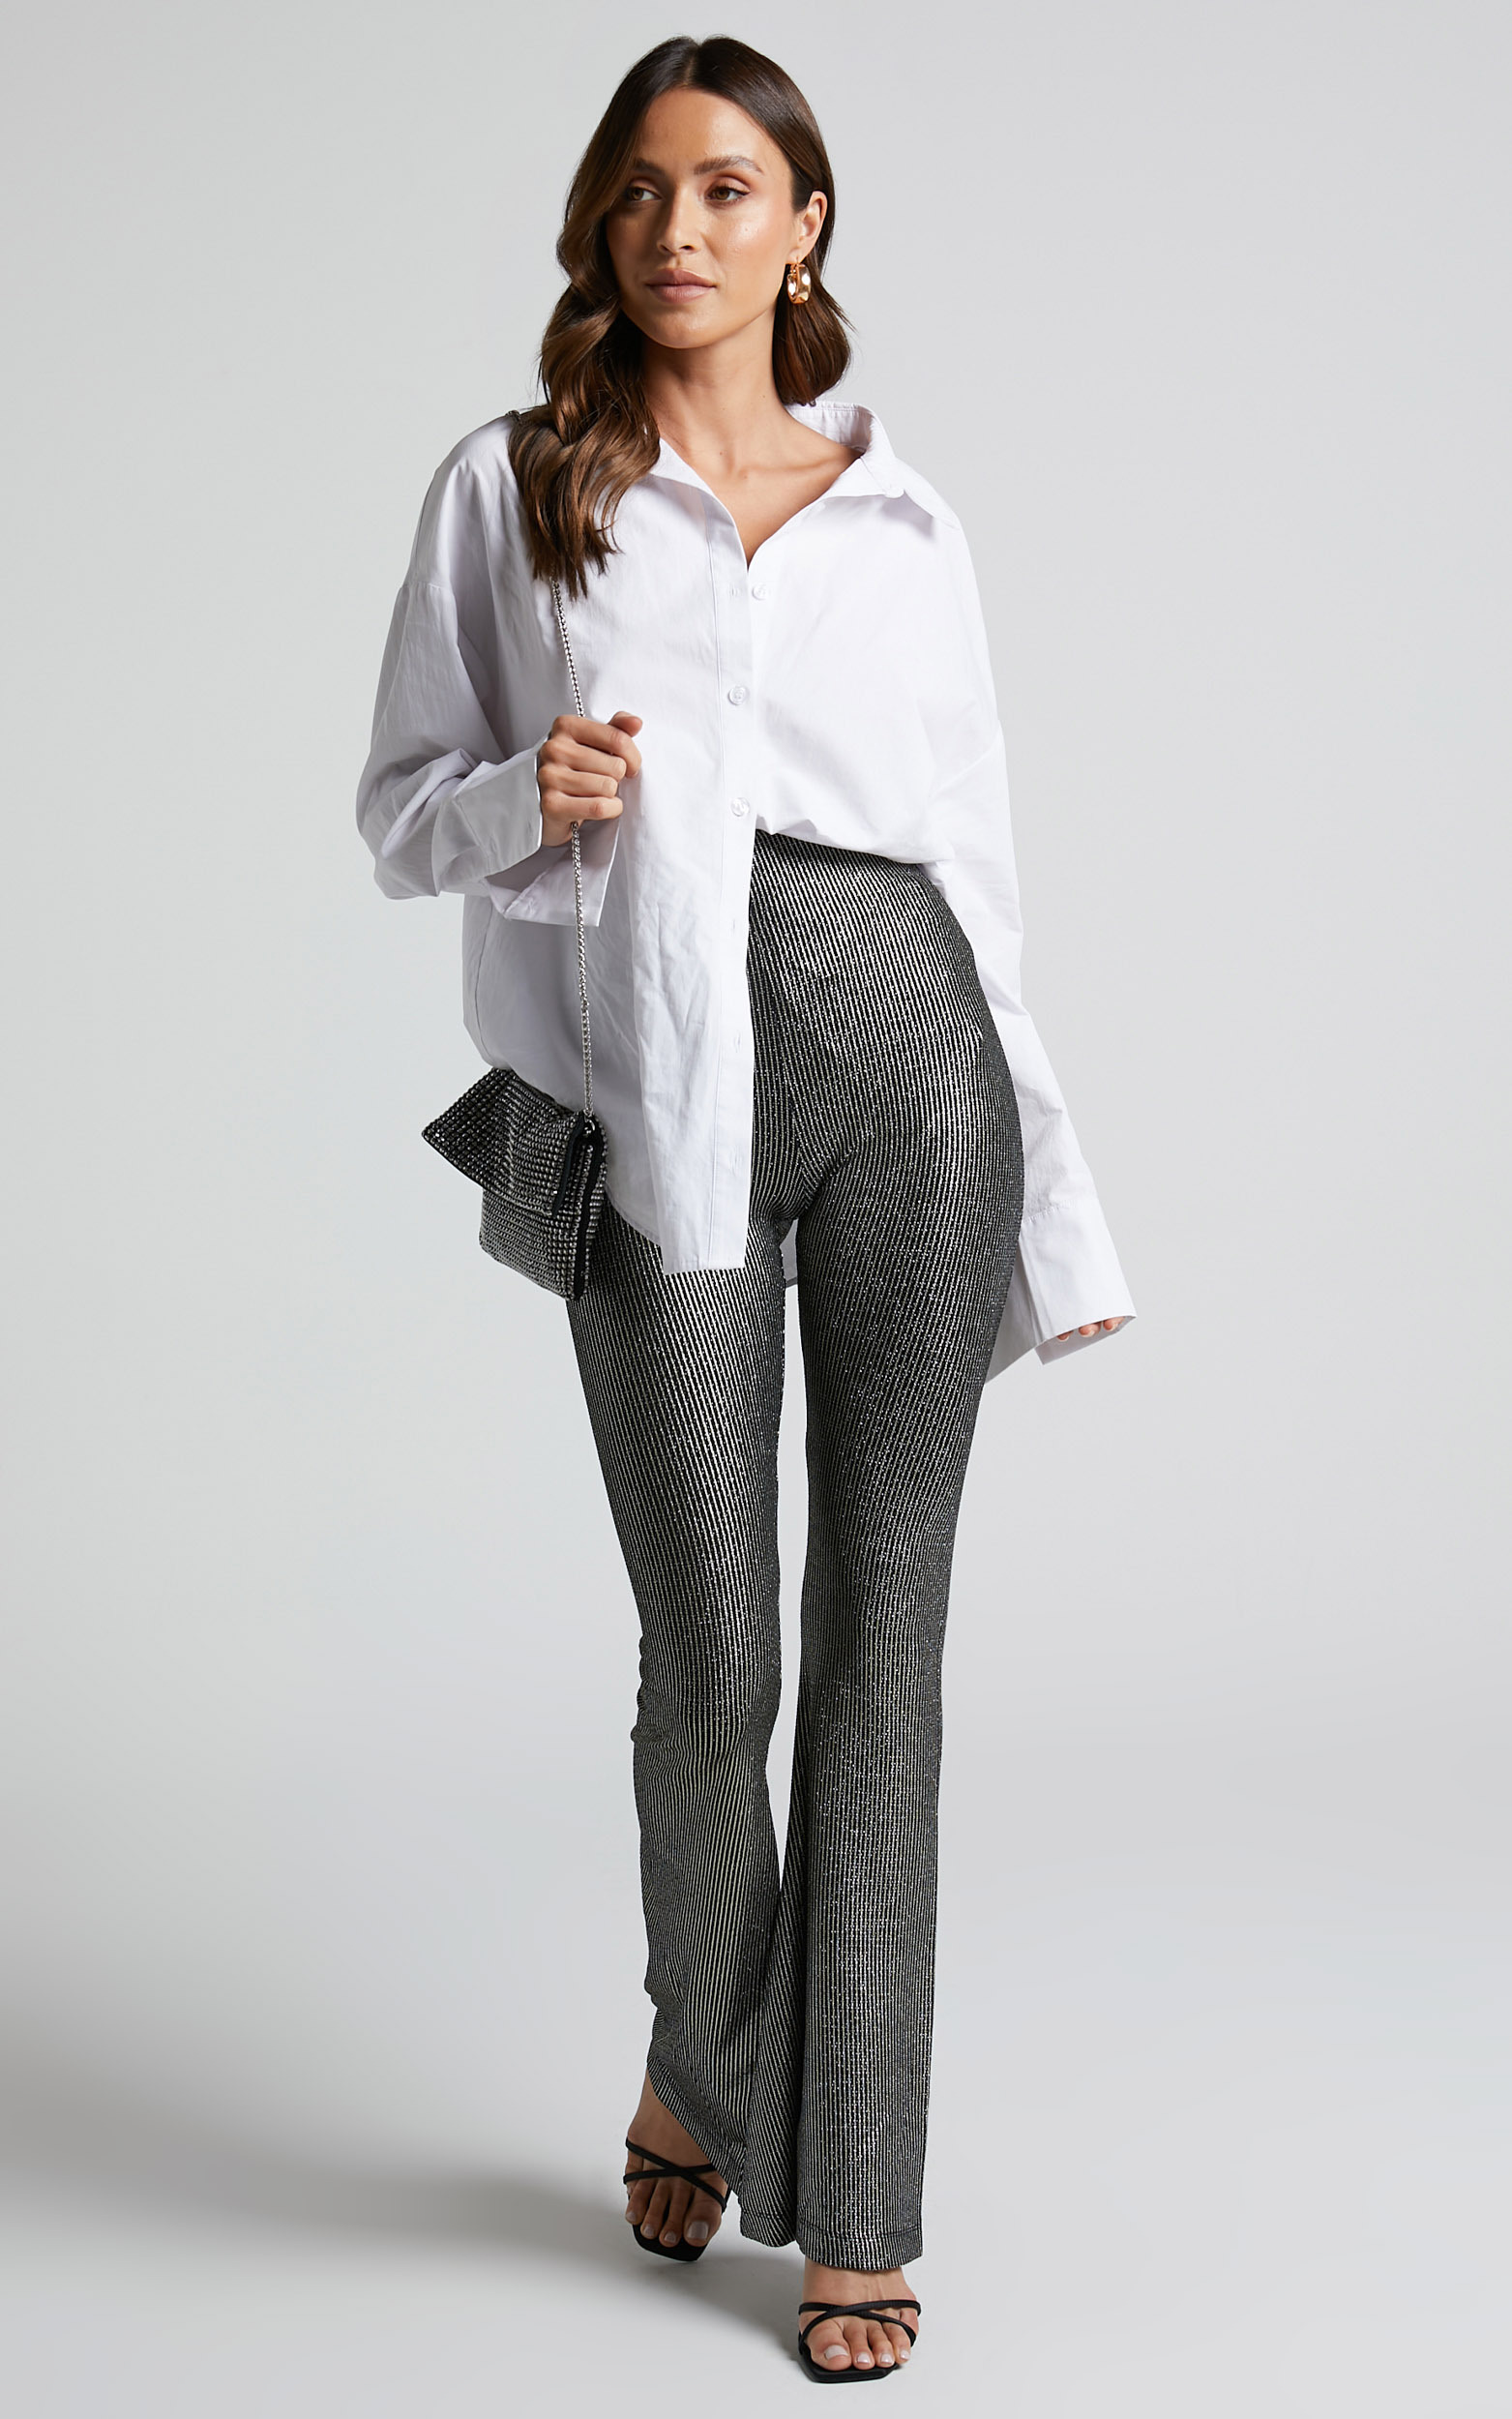 Merlin High Waisted Lurex Flared Pants in Black and Silver - 04, BLK1, hi-res image number null